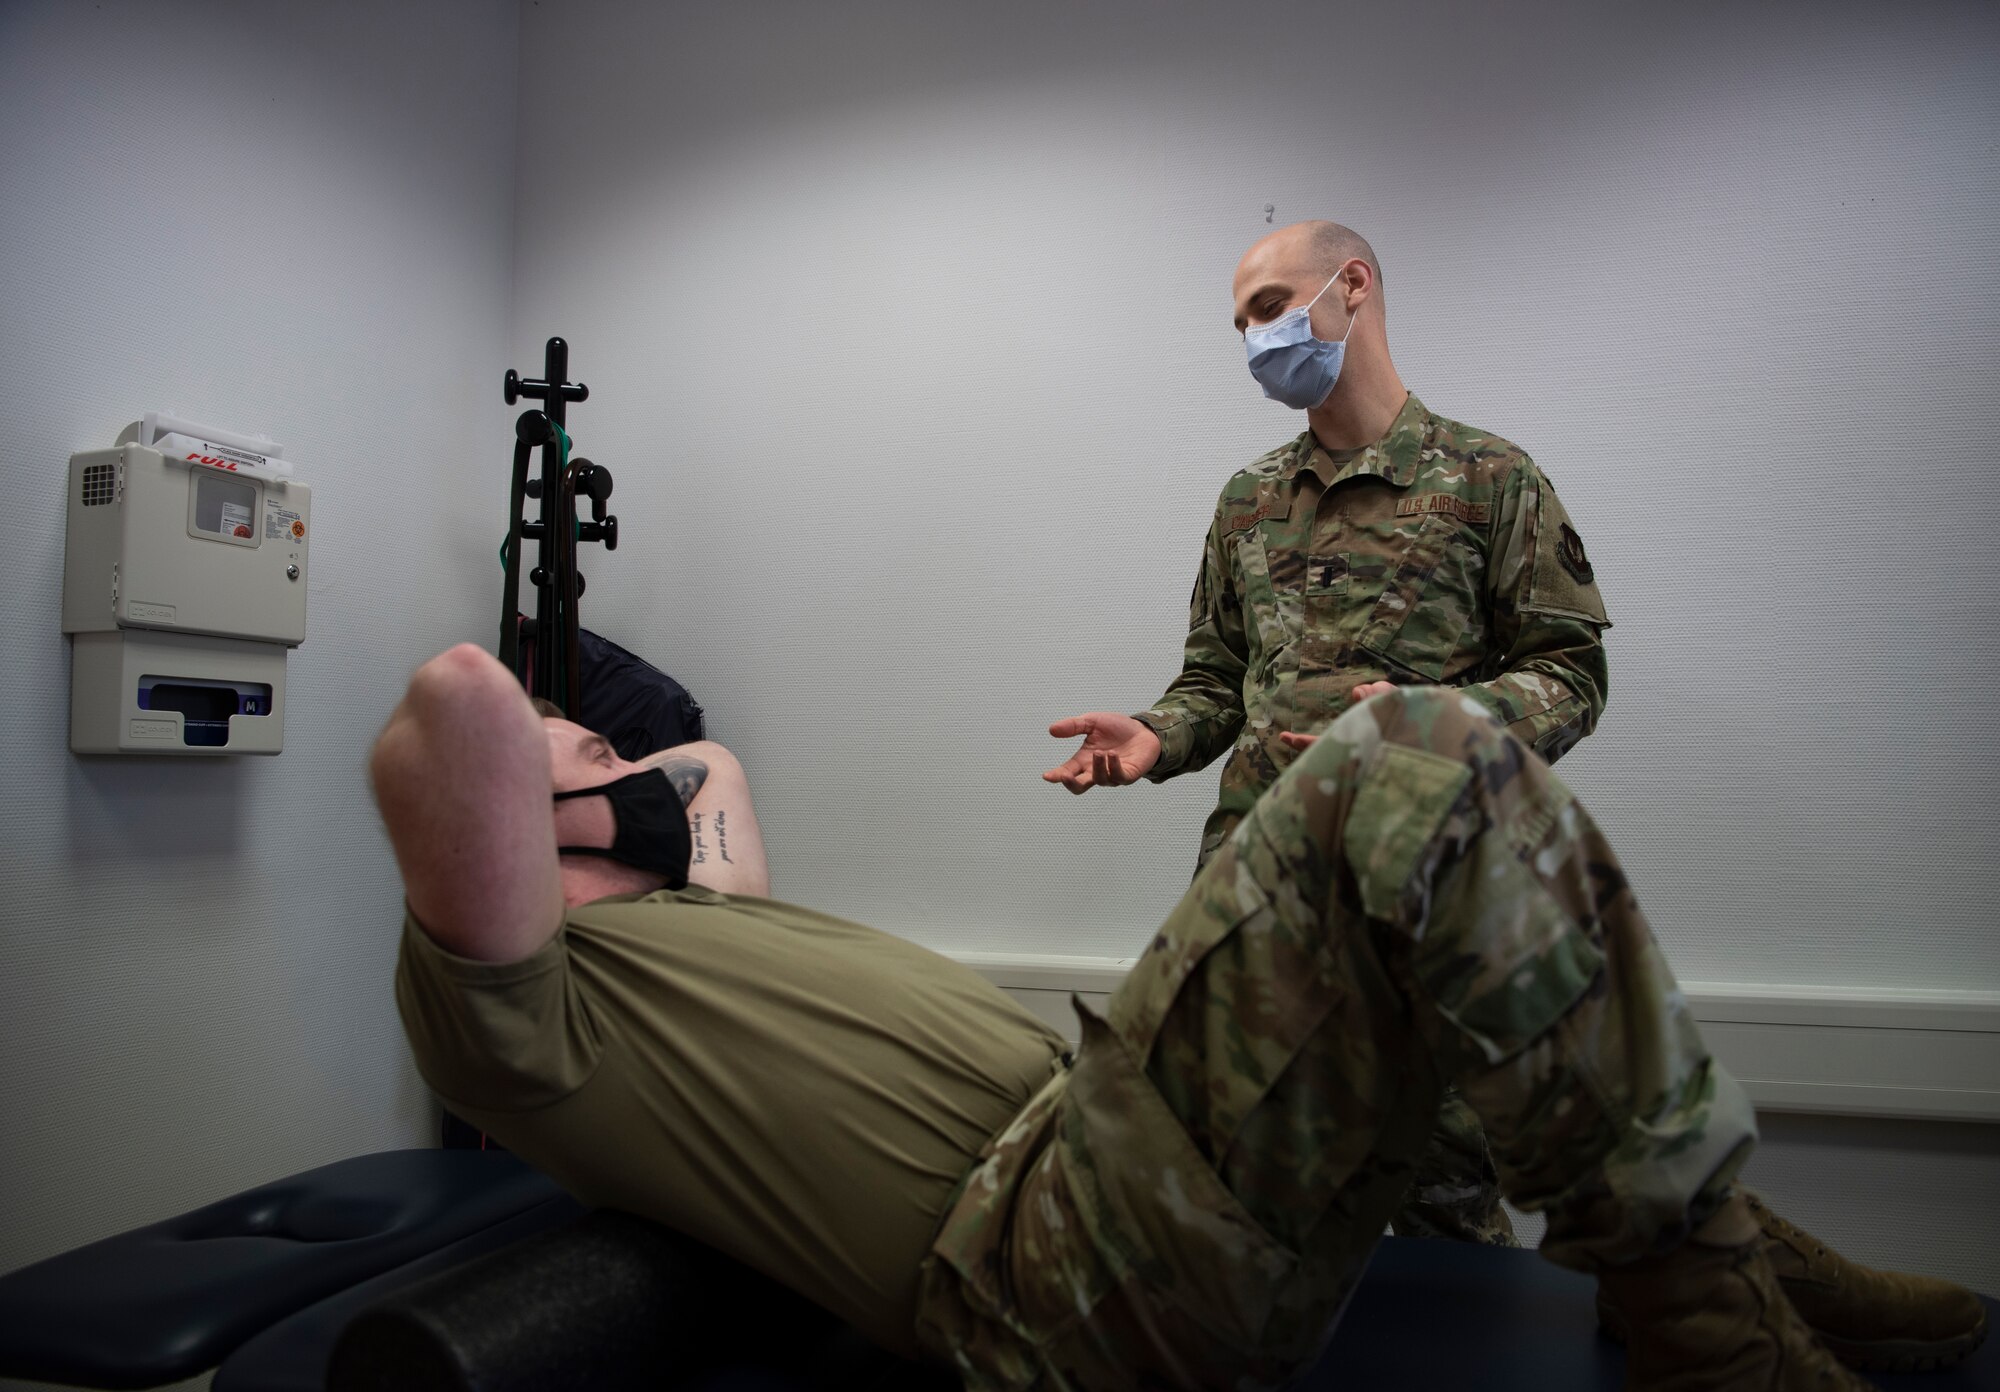 U.S. Air Force 1st Lt. Spencer Carrier, 86th Operational Medical Readiness Squadron physical therapist, explains foam rolling to Staff Sgt. Randy Sayer, 86th OMRS physical therapy technician, at Ramstein Air Base, Germany, Jan. 13, 2021.